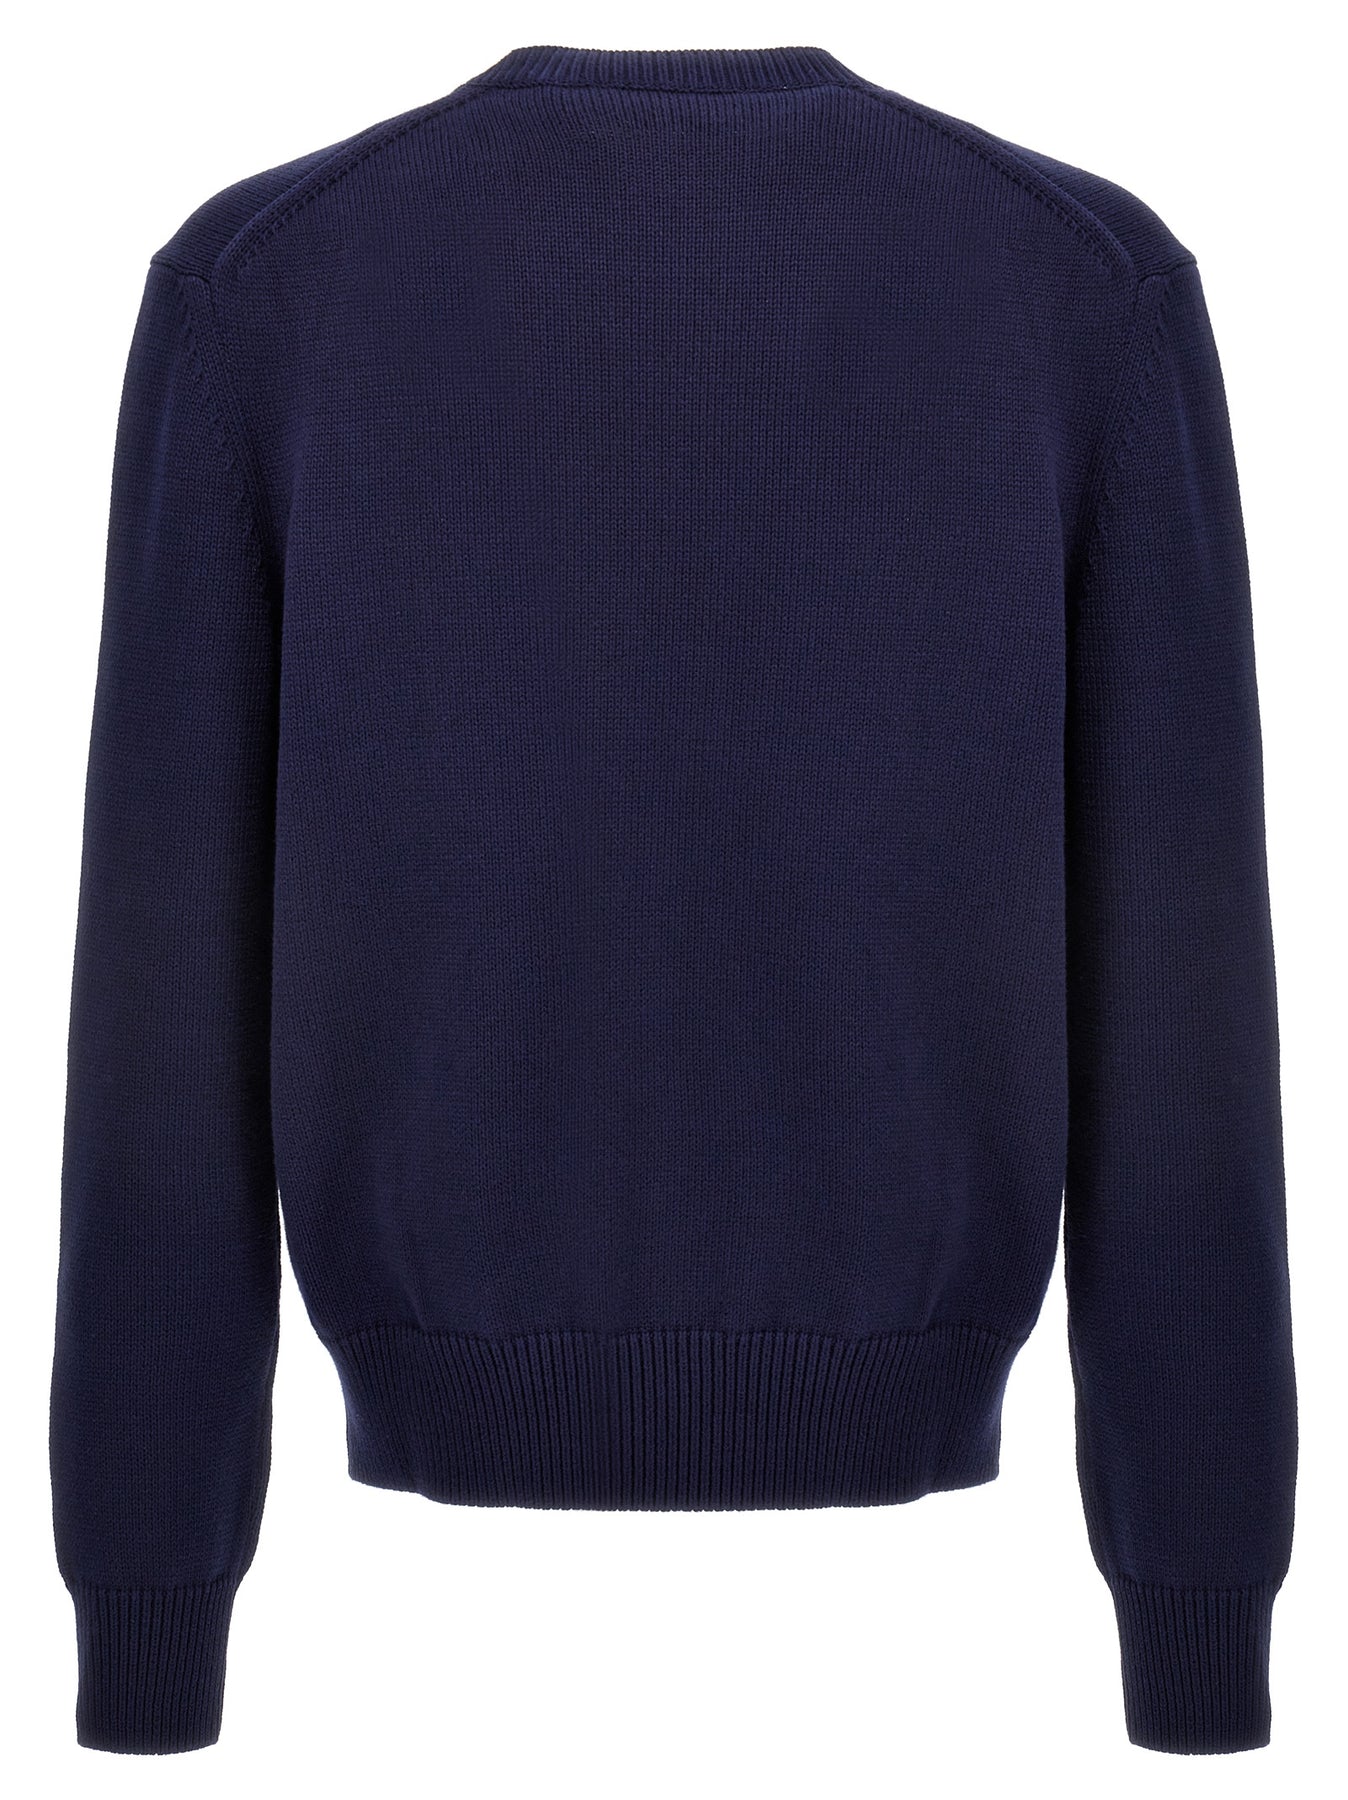 Shop Alexander Mcqueen Logo Embroidered Sweater Sweater, Cardigans Blue